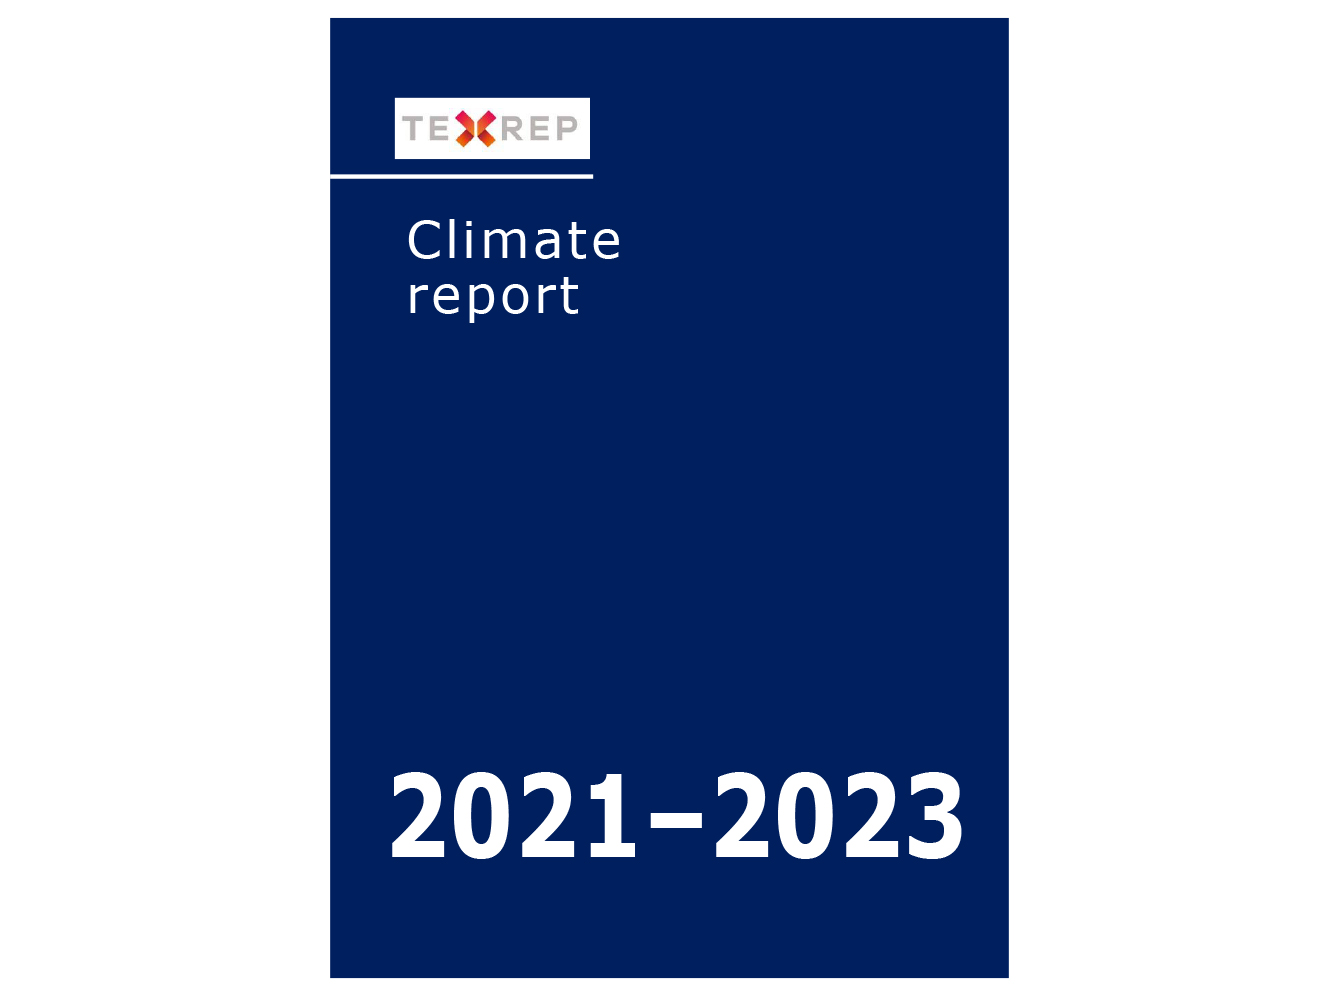 Read our climate report